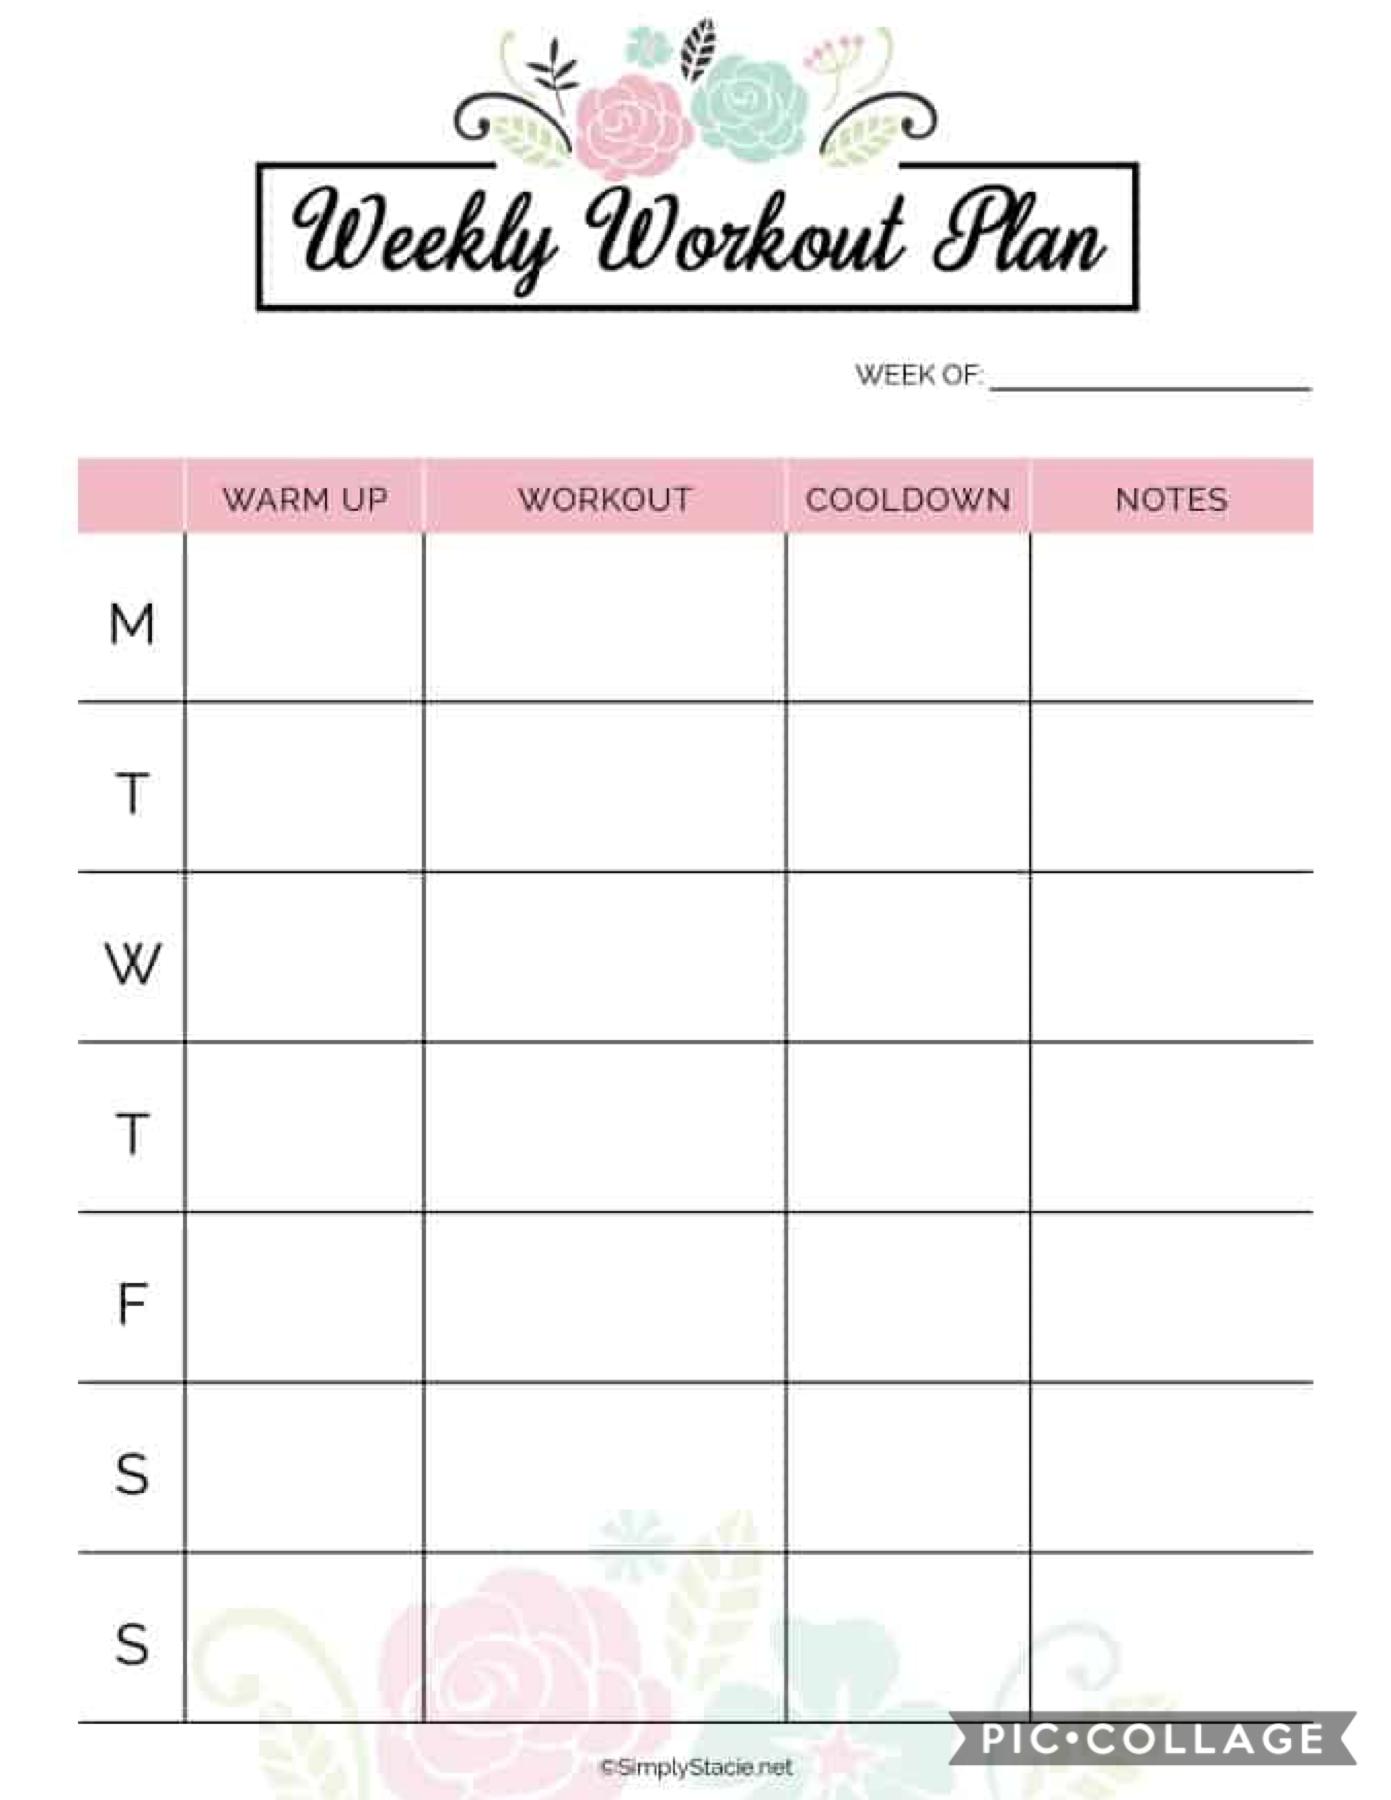 Planner to help organize your workouts!